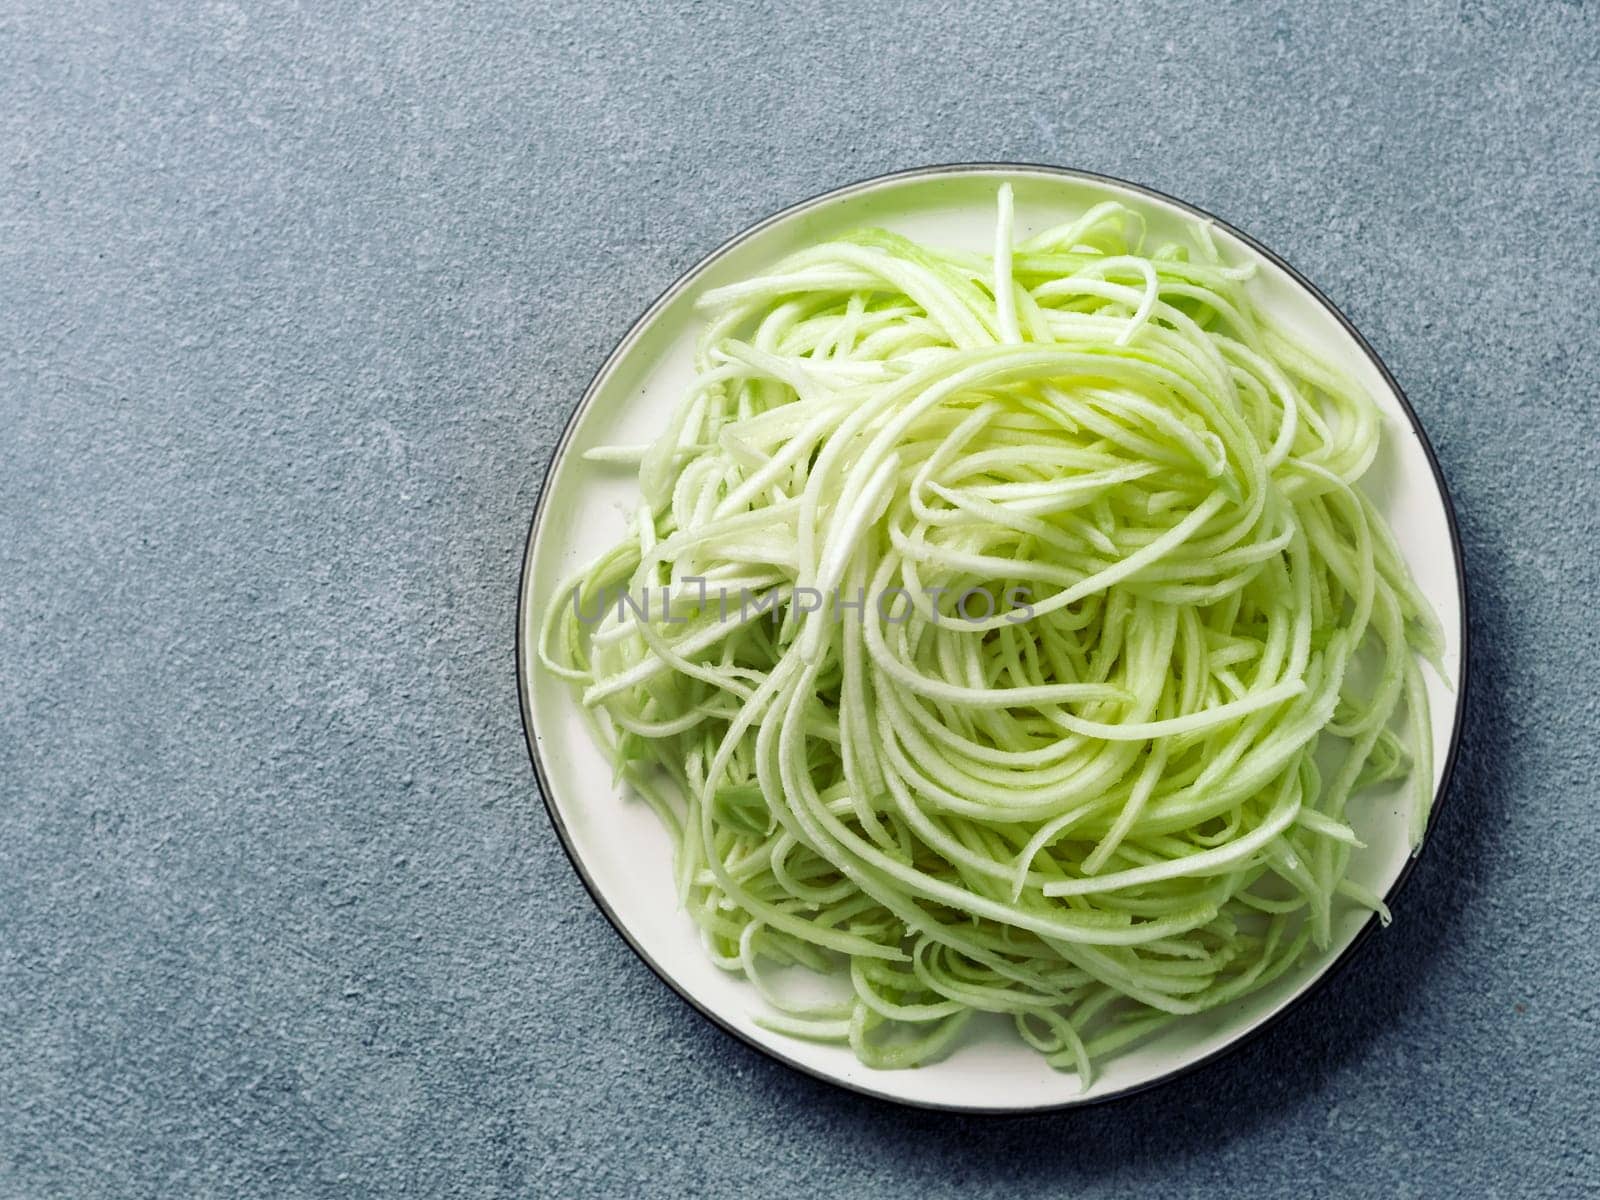 Zucchini noodles on plate. Top view, copy space by fascinadora